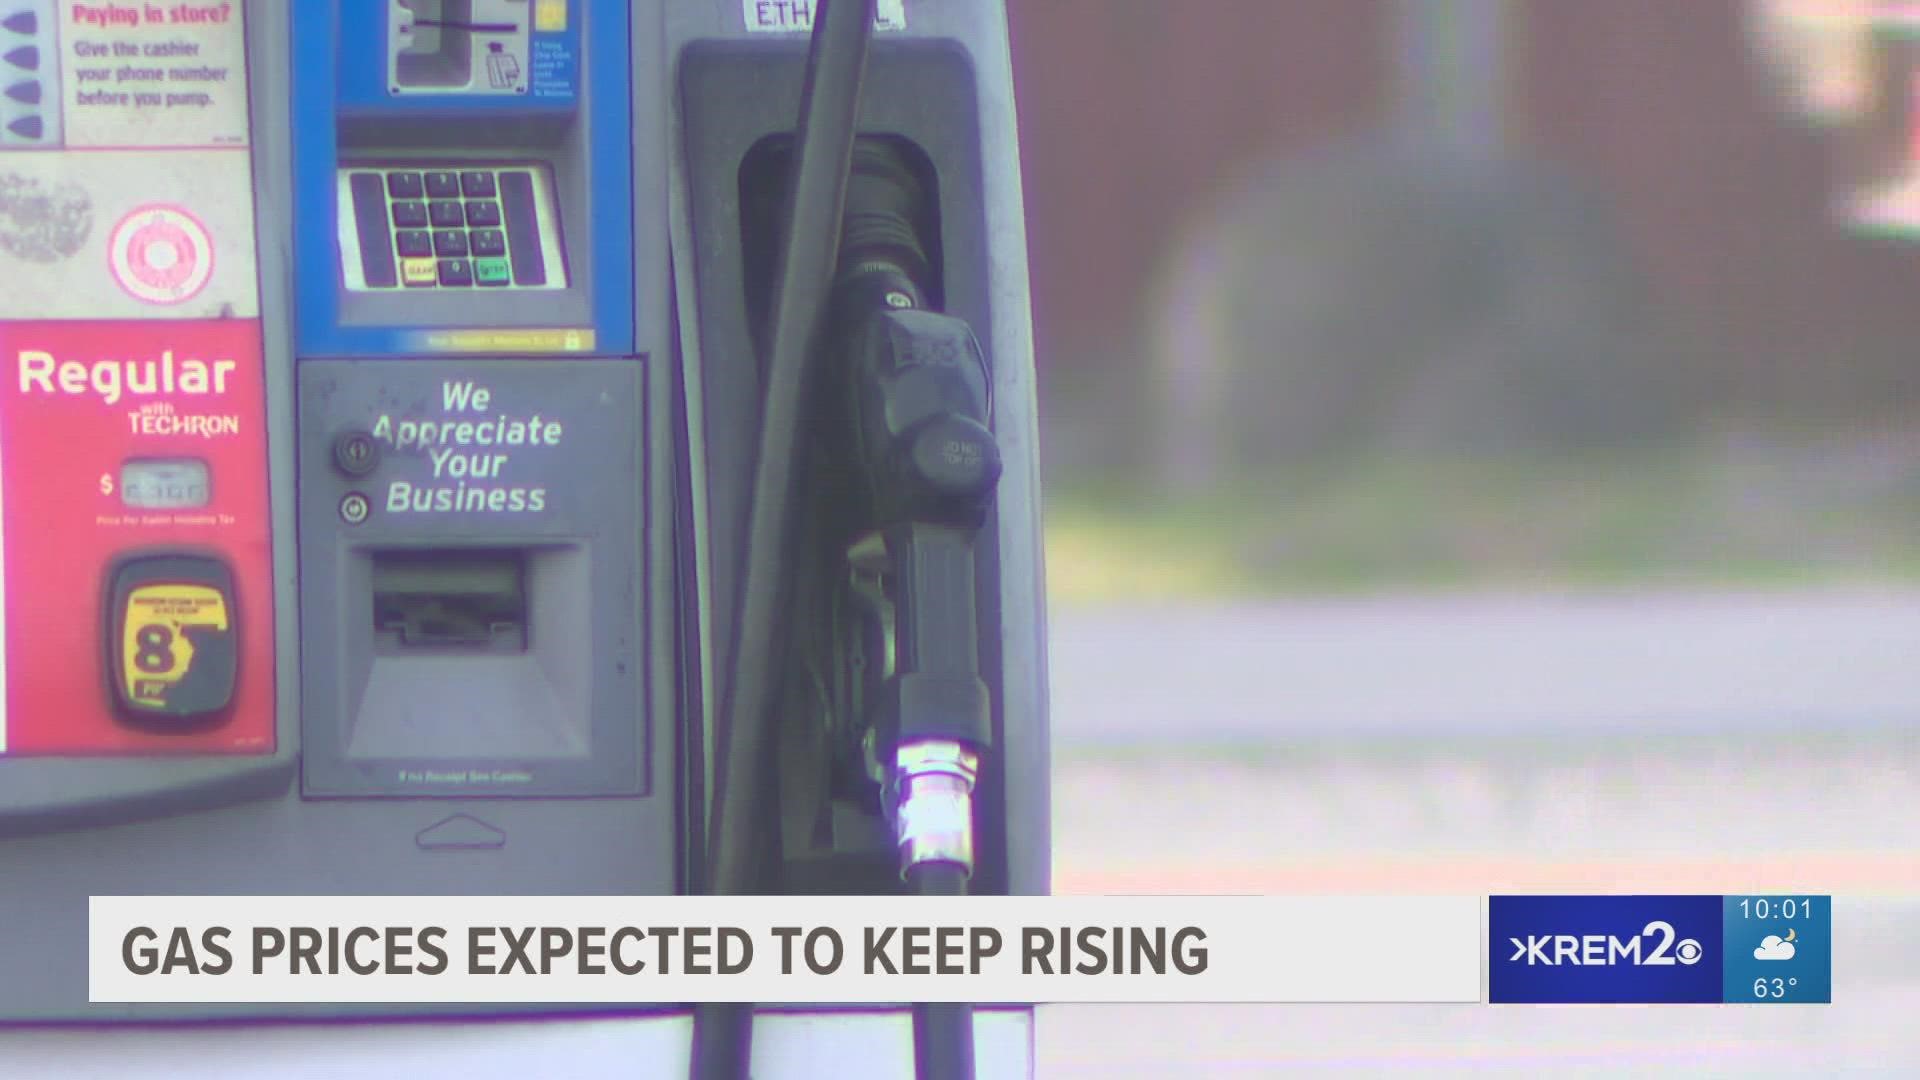 The move could deal the struggling global economy another blow and raise politically sensitive pump prices for U.S. drivers just ahead of key elections.